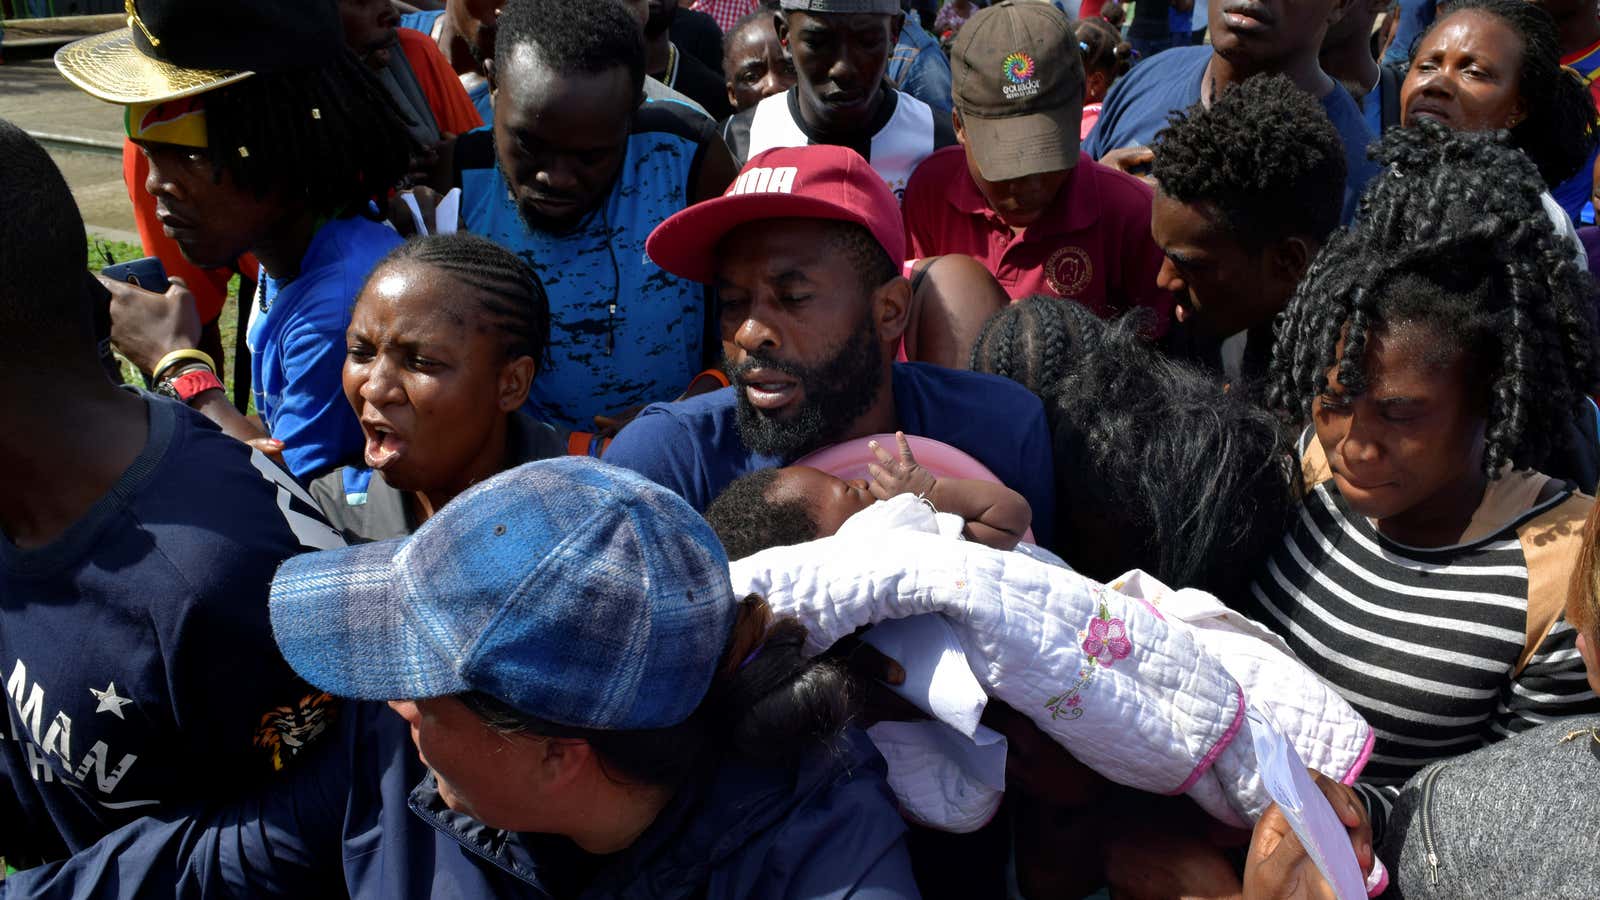 A migrant from Cameroon holds his baby while trying to enter the Siglo XXI immigrant detention center to request humanitarian visas, issued by the Mexican government, to cross the country towards the United States, in Tapachula, Mexico June 27, 2019.